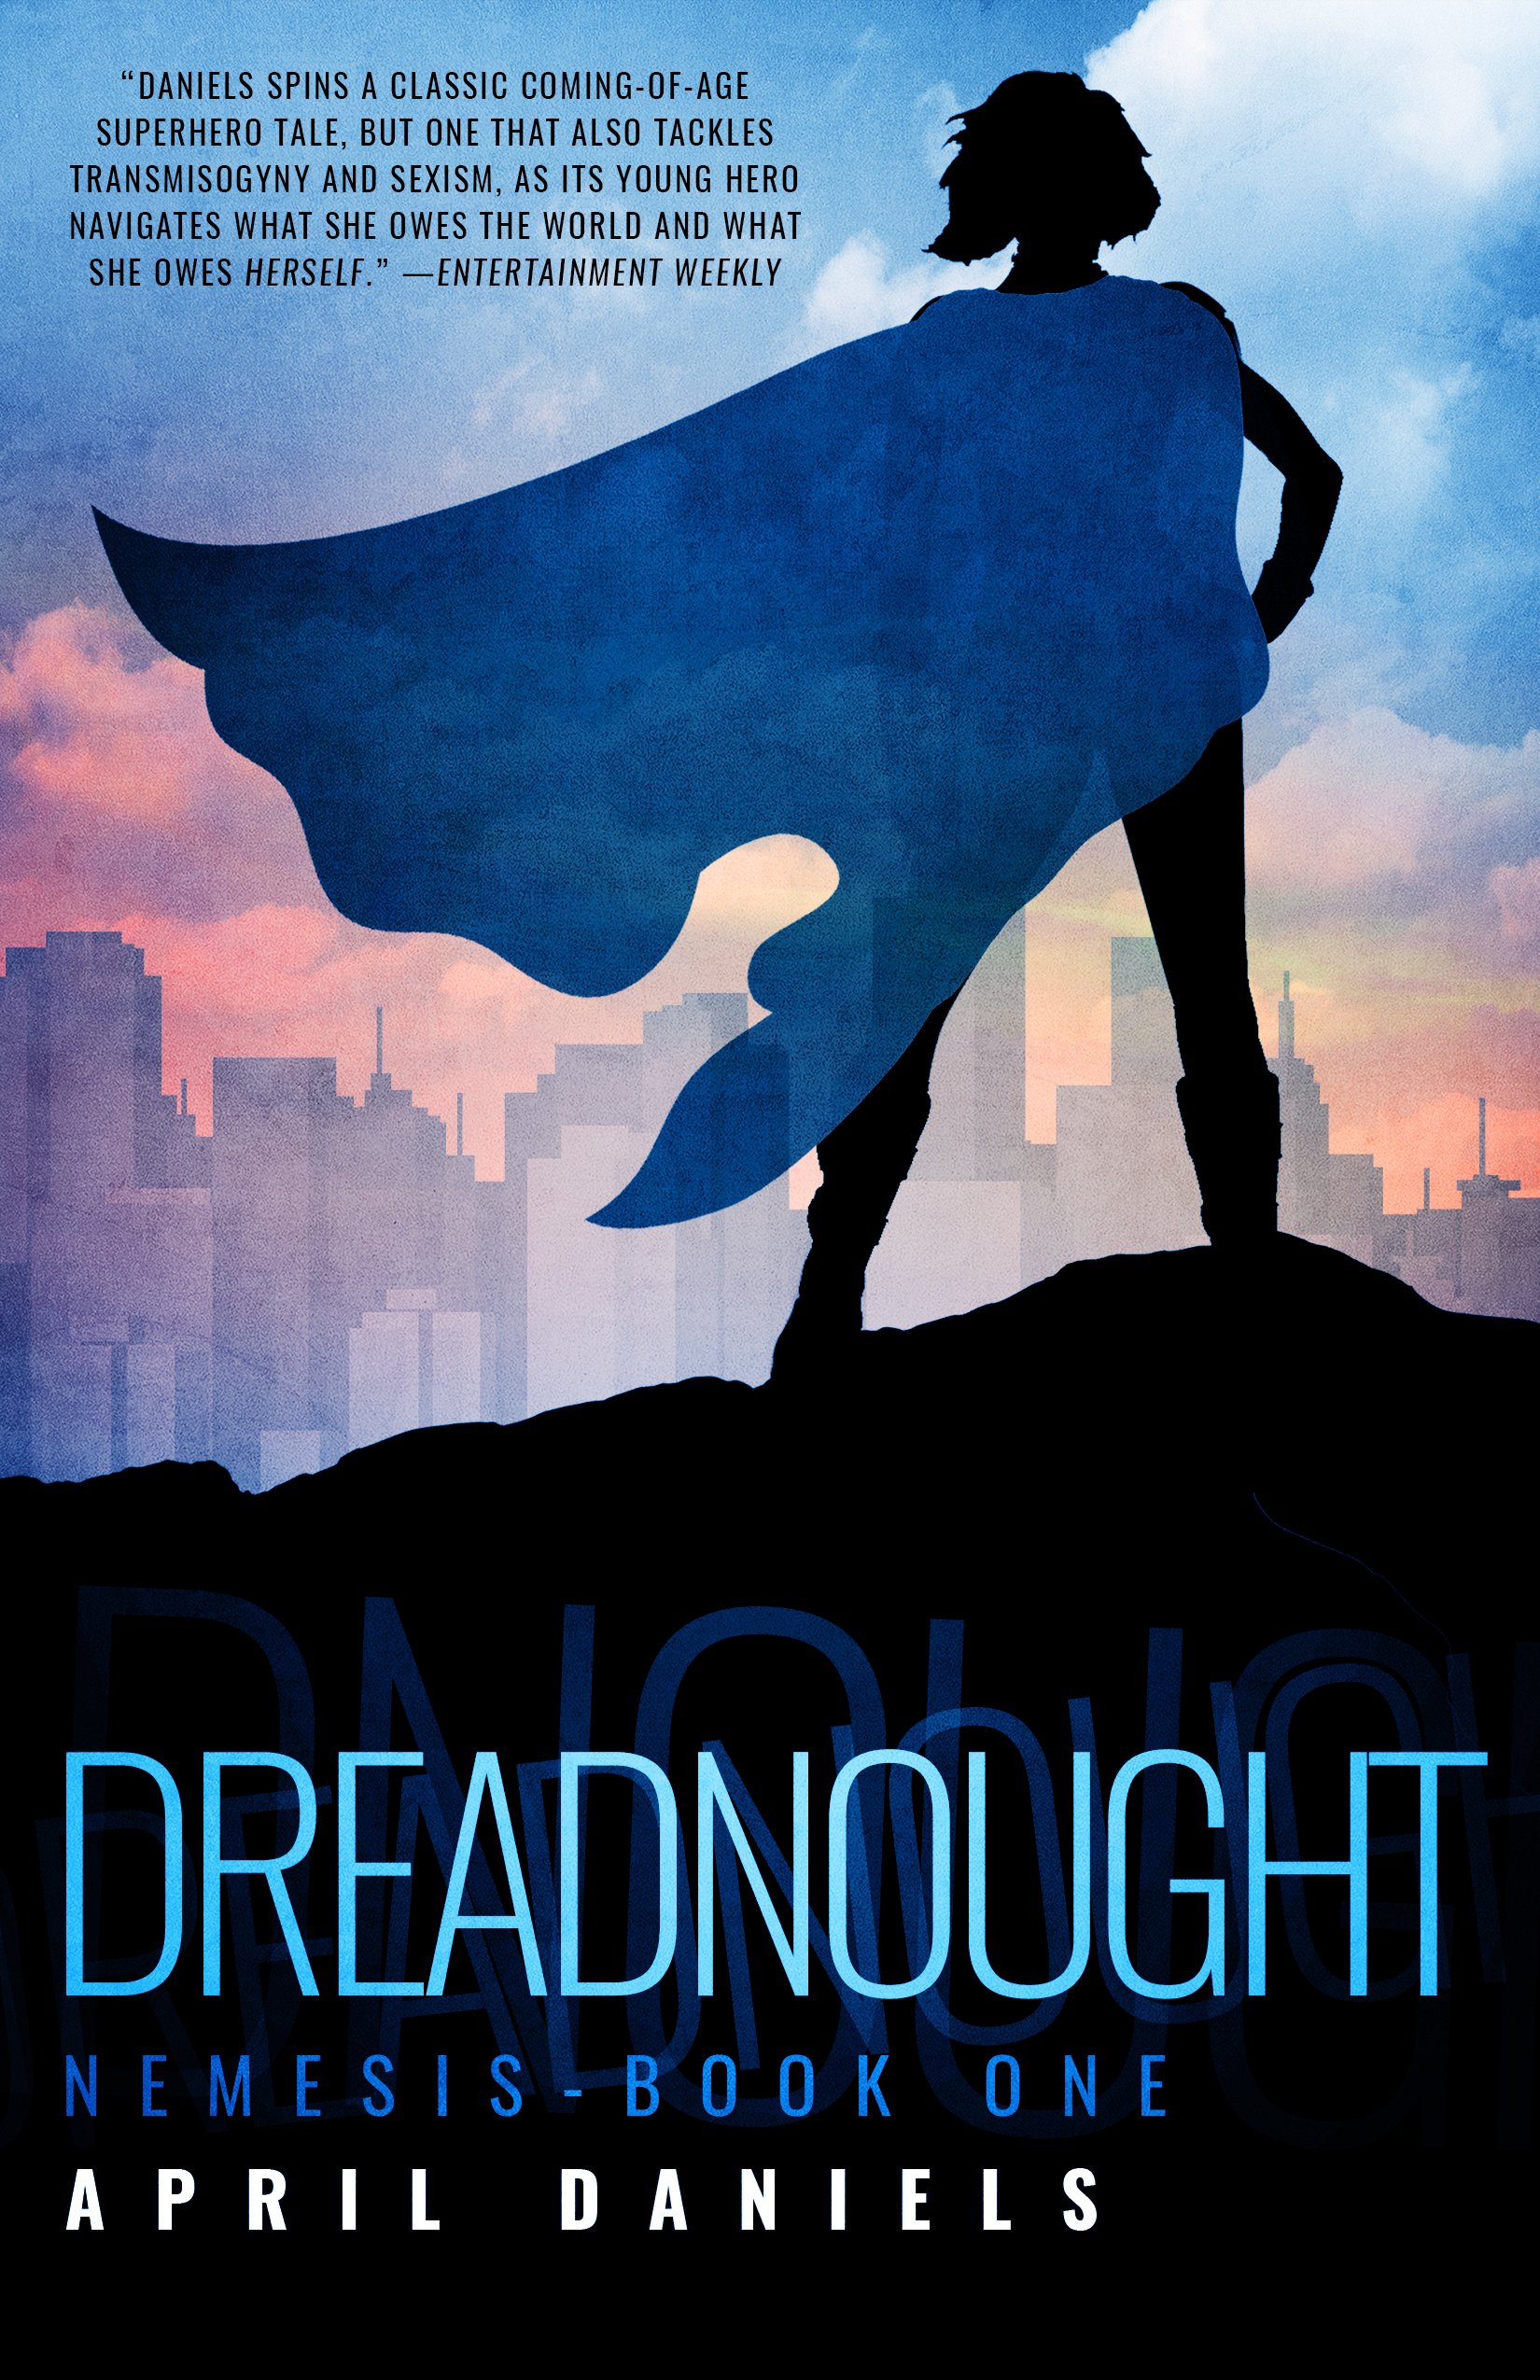 Cover of Dreadnought by April Daniels